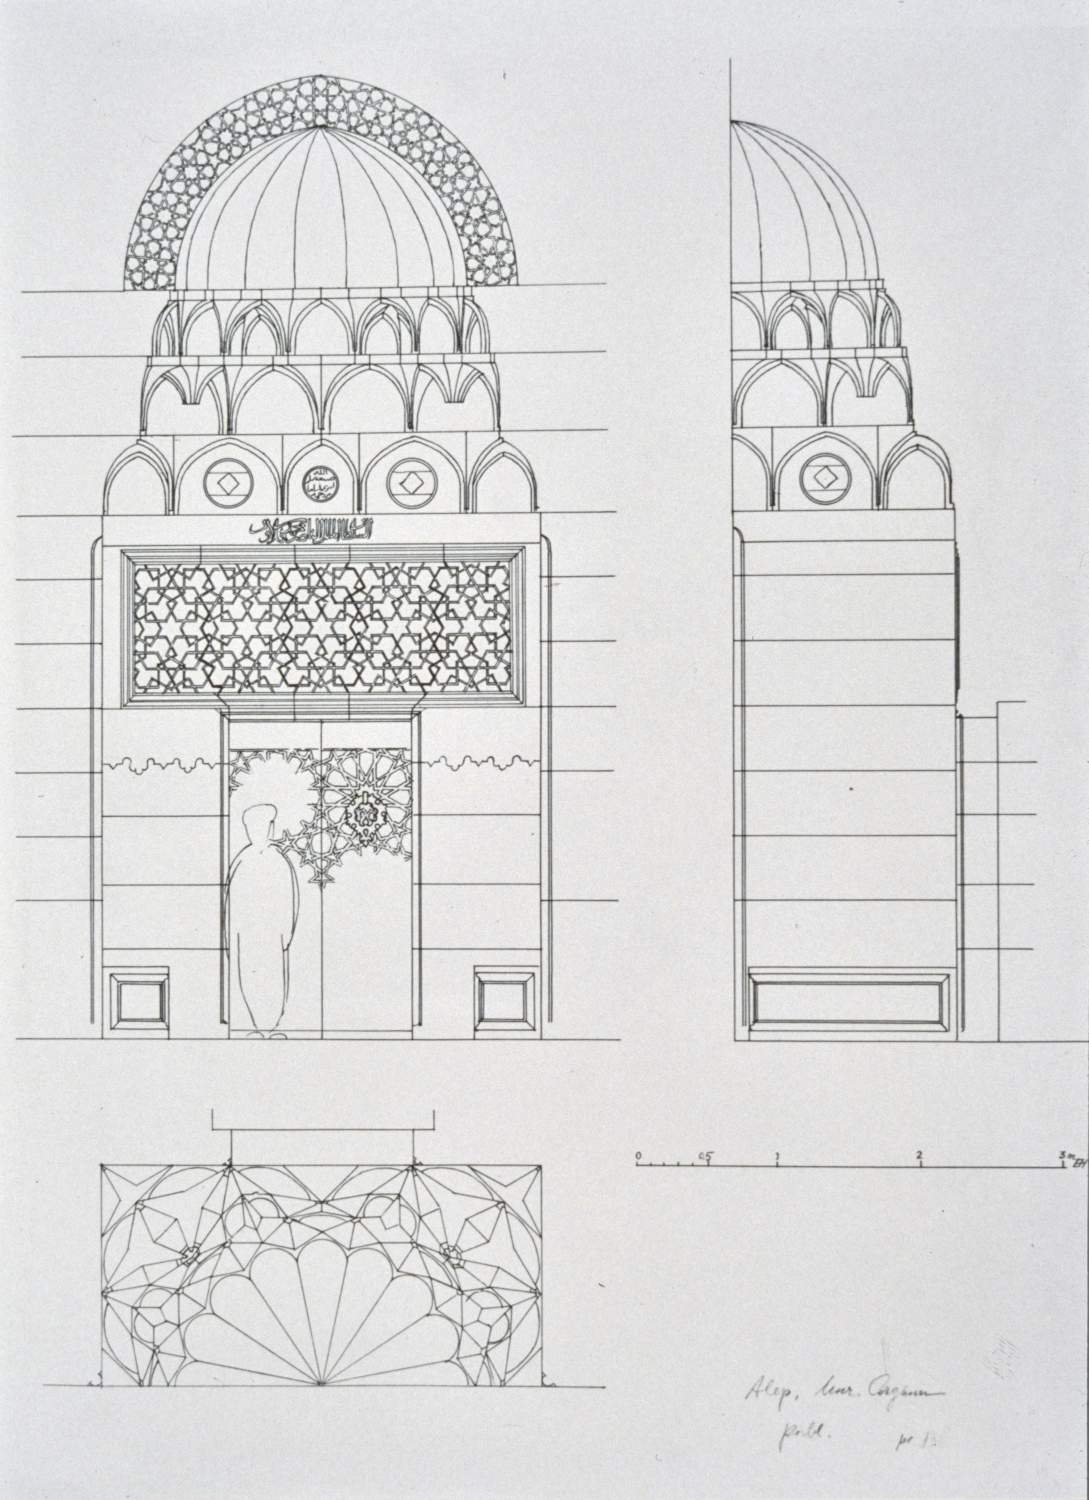 Entry portal elevation and section drawing by Ernst Herzfeld.